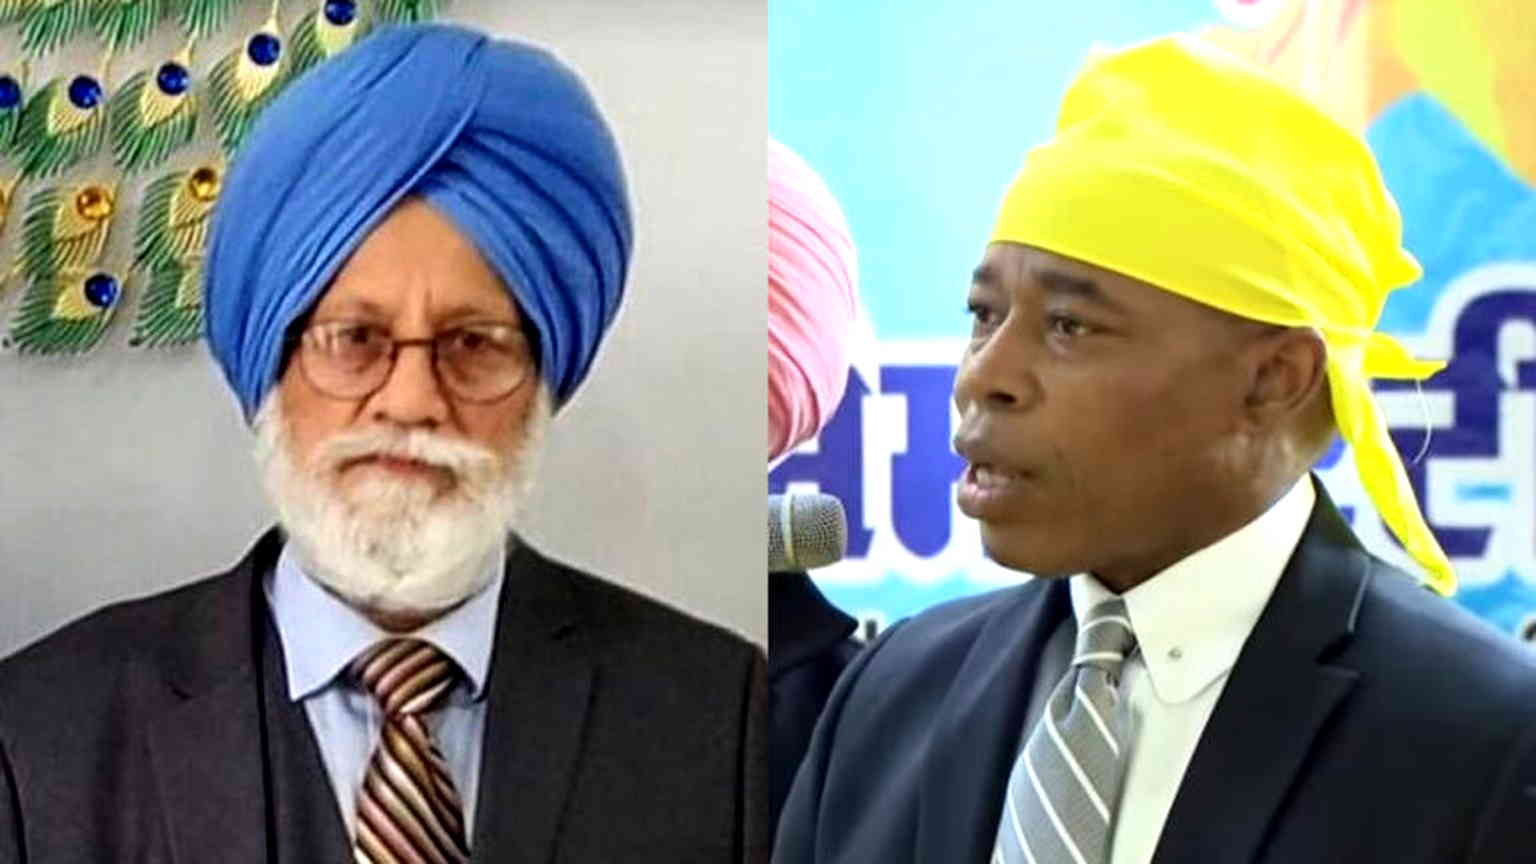 NYC Mayor Adams vows protection for Sikhs after 66-year-old man’s death